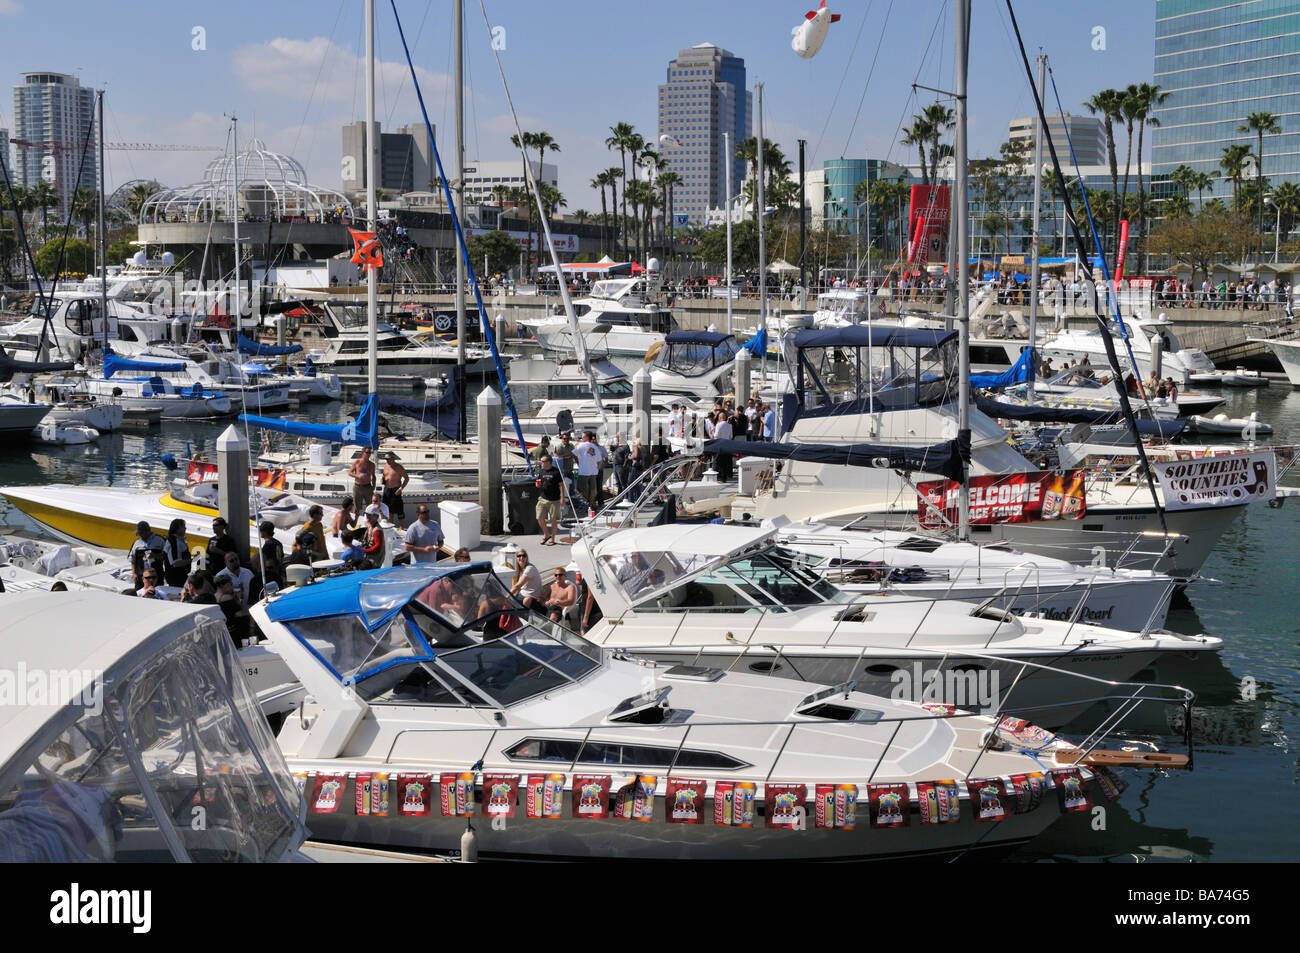 Festive atmosphere and plenty of partying and celebrating on the many docks and boats in the Rainbow Harbor Stock Photo